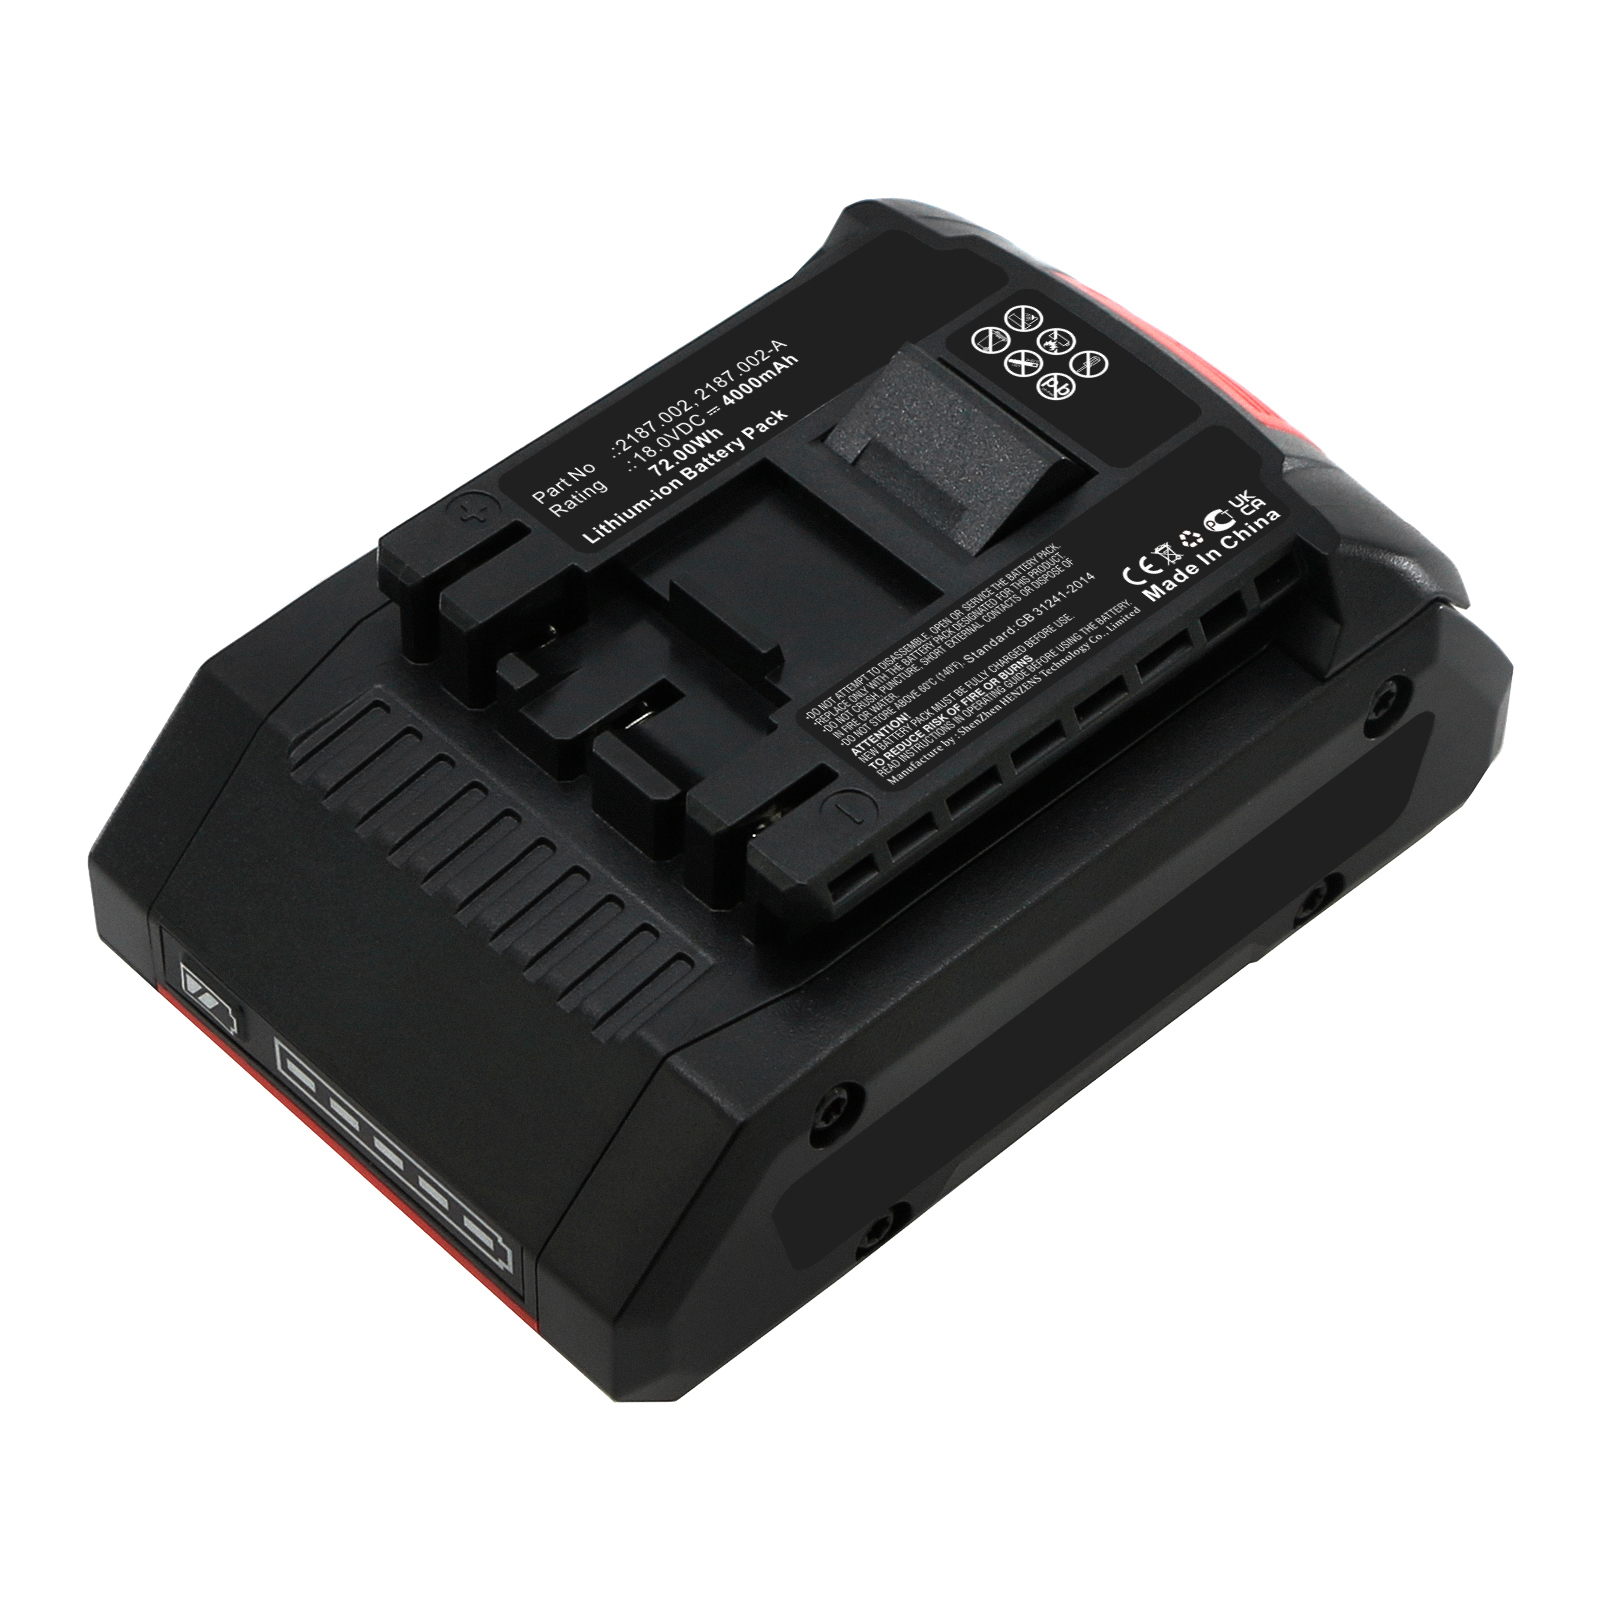 Synergy Digital Strapping Tools Battery, Compatible with ORGAPACK 2187.002 Strapping Tools Battery (Li-ion, 18V, 4000mAh)